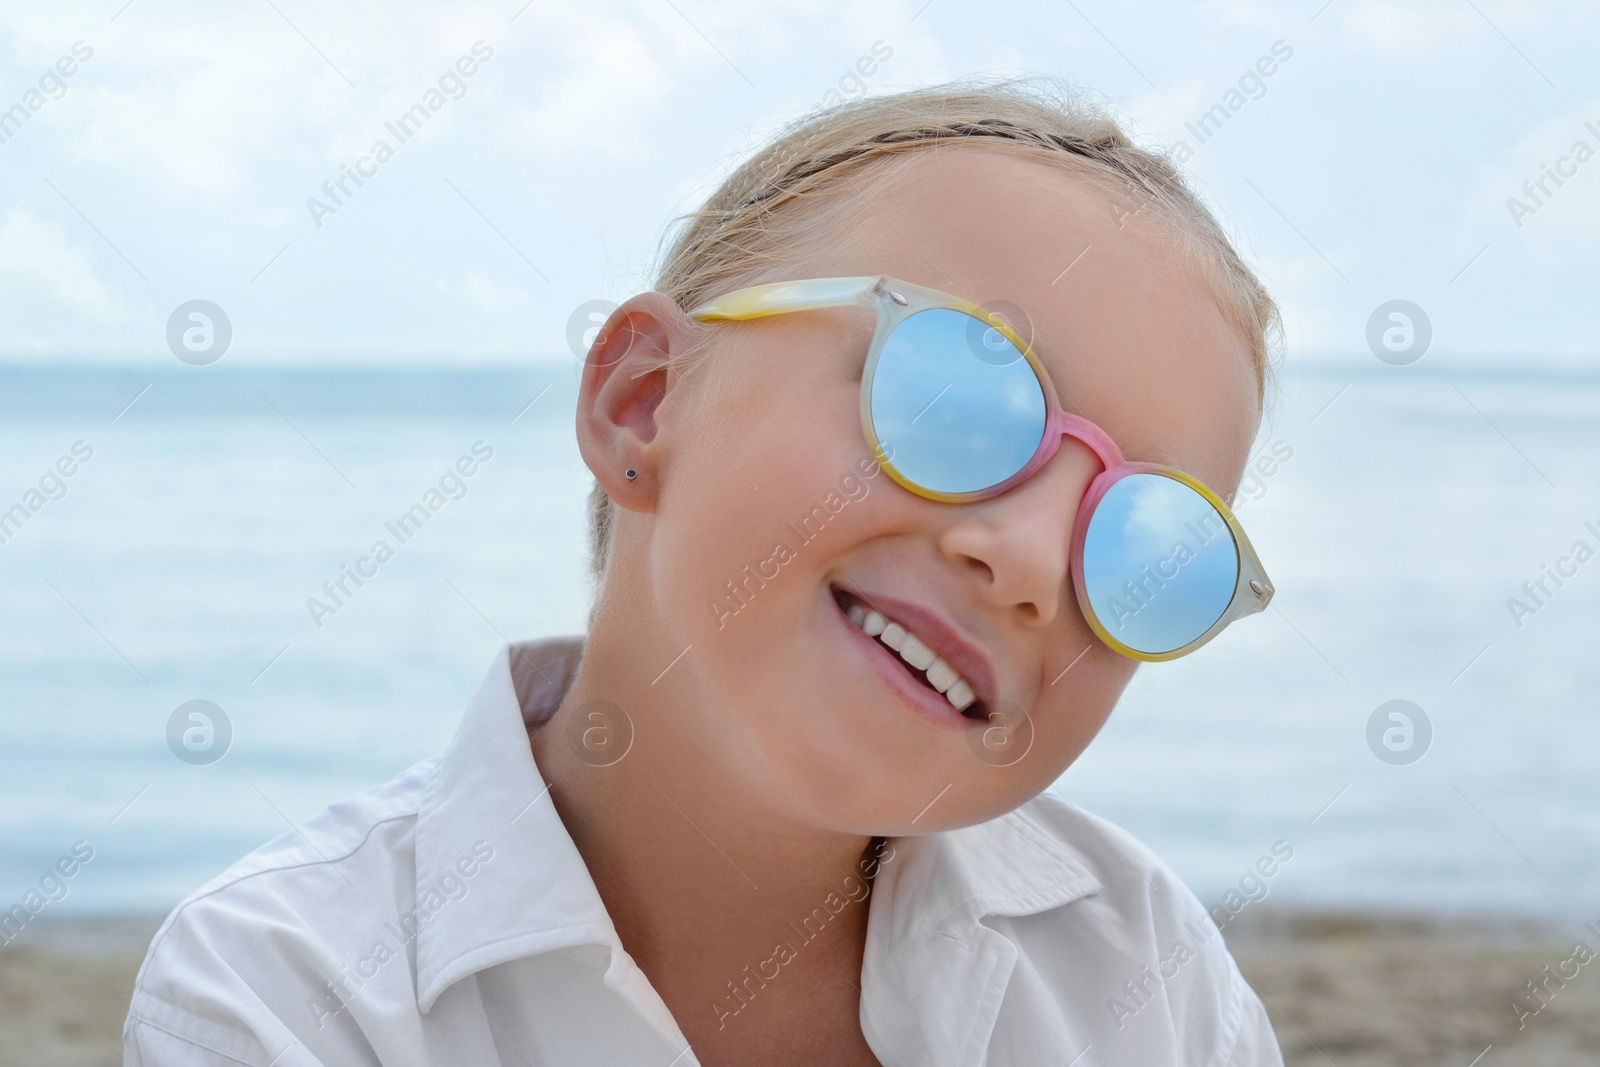 Photo of Little girl wearing sunglasses at beach on sunny day